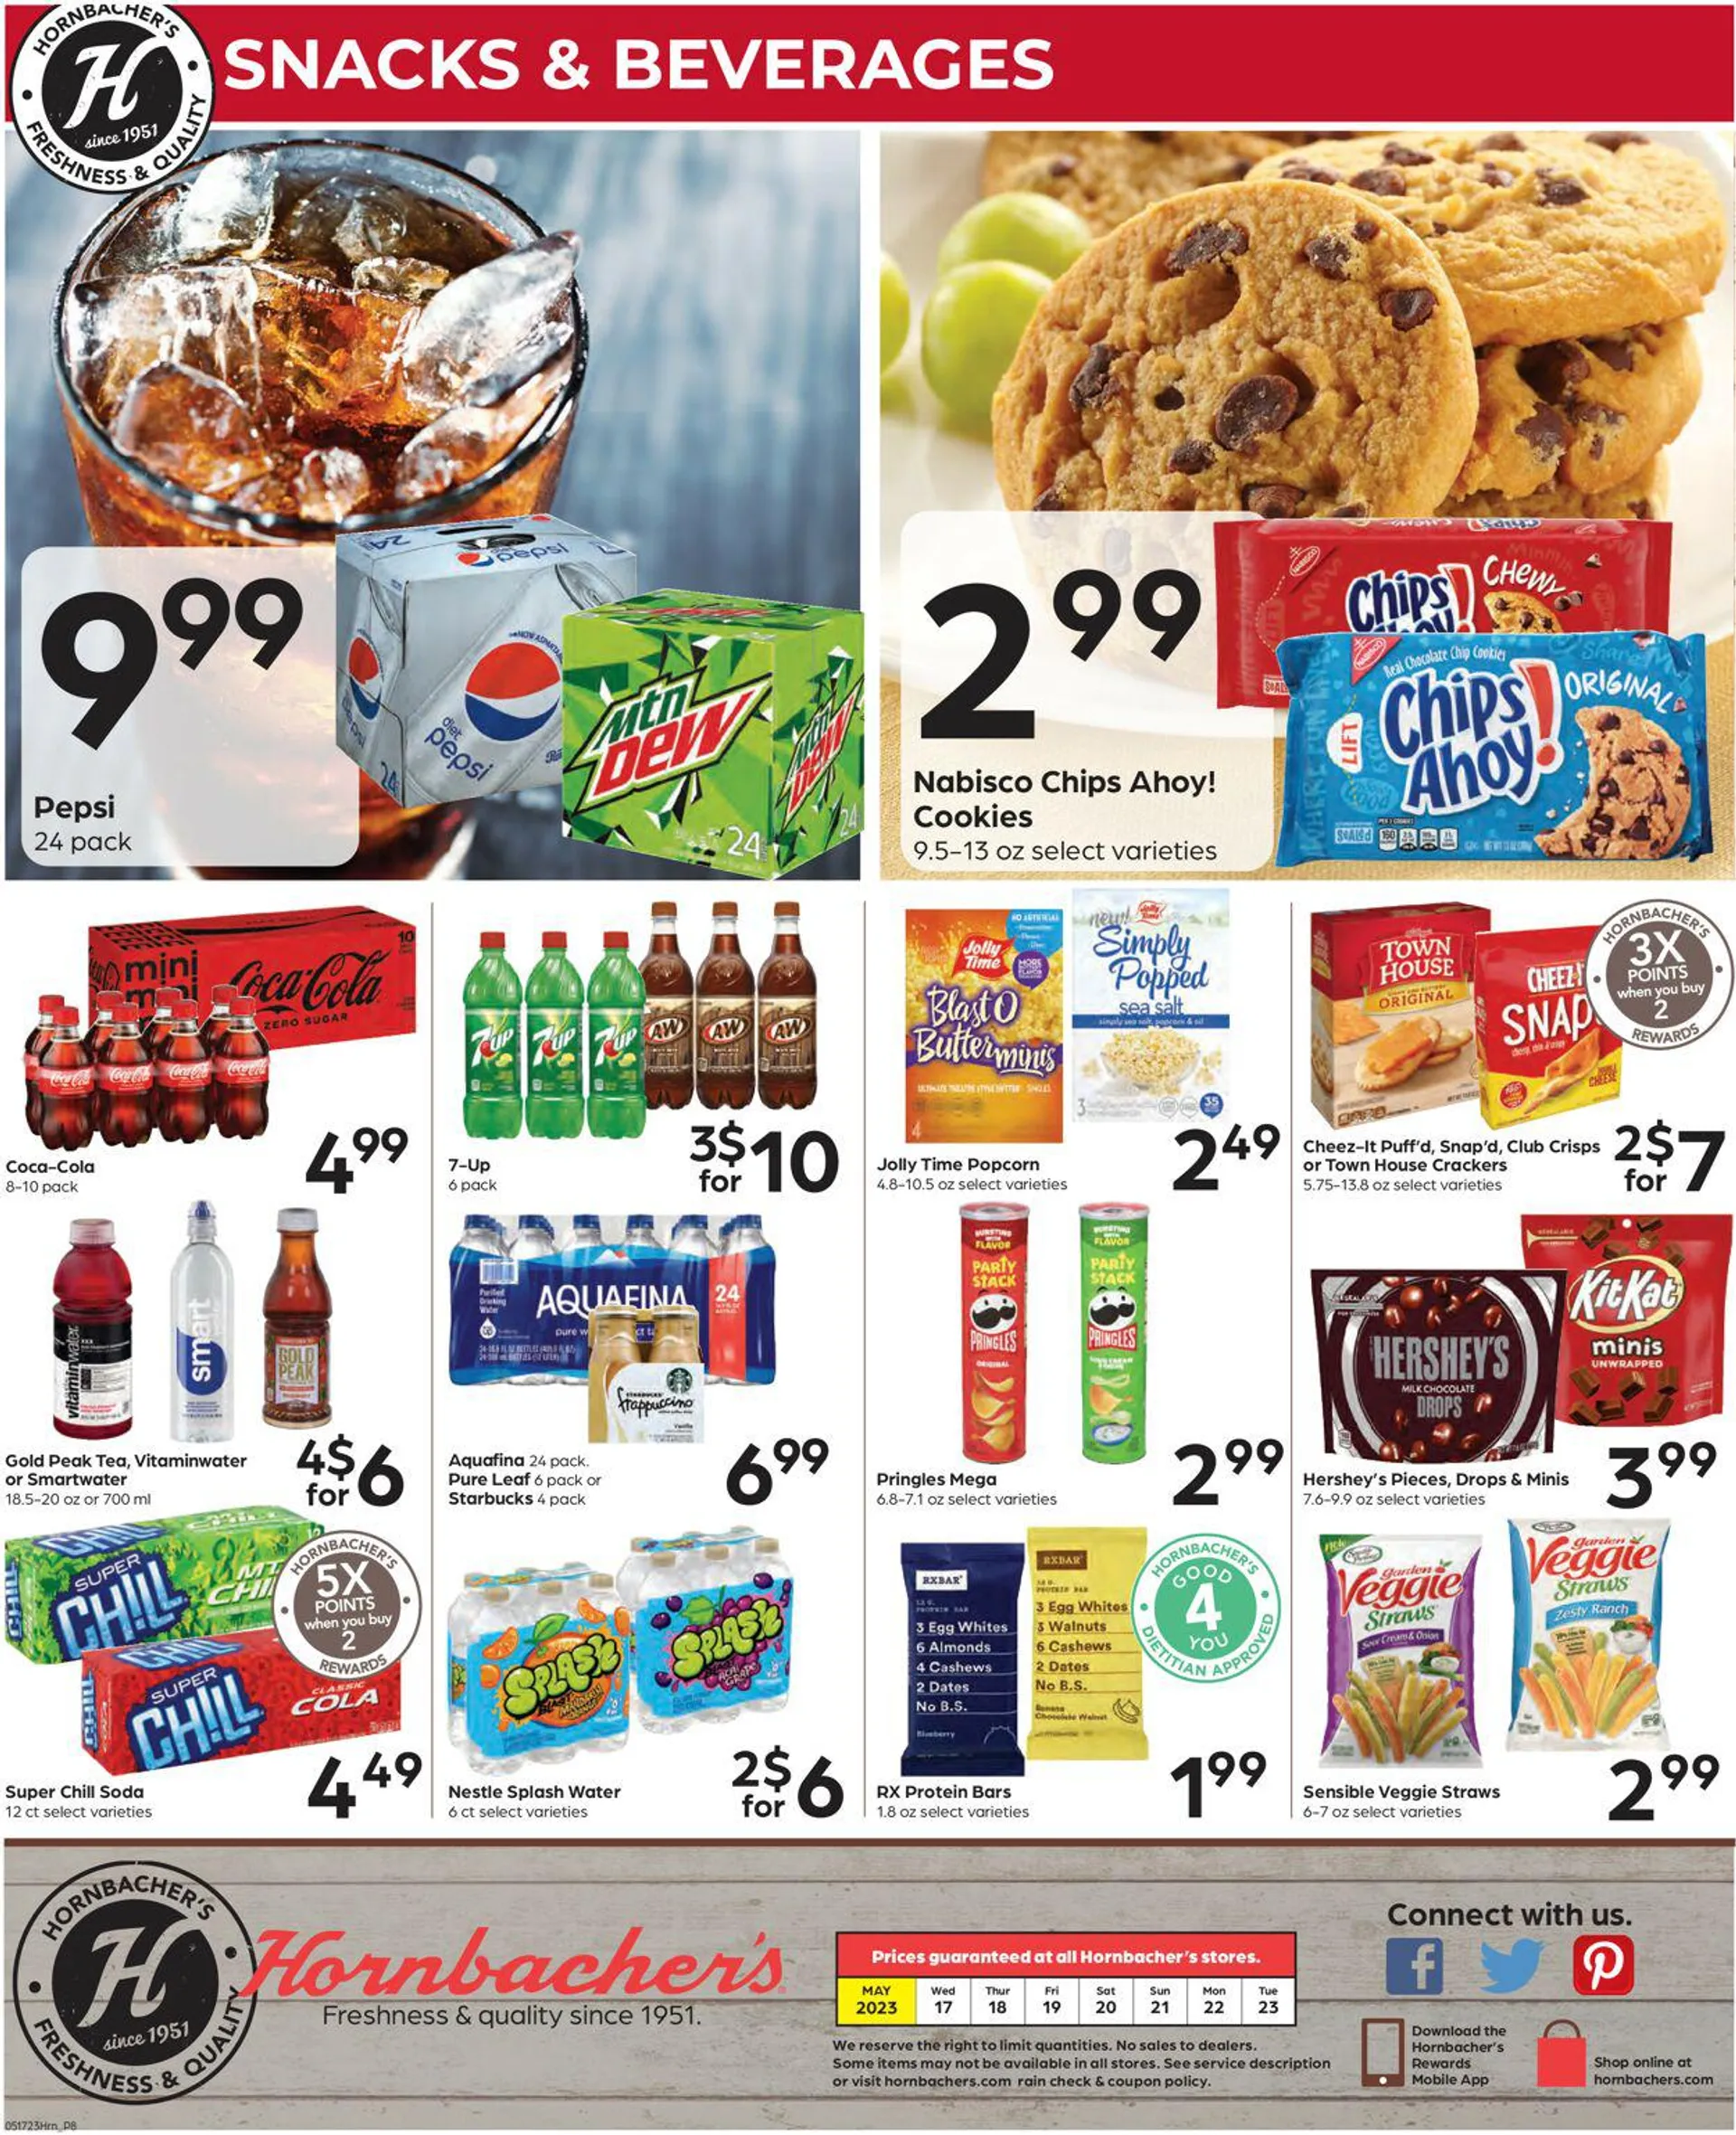 Hornbachers Current weekly ad - 8